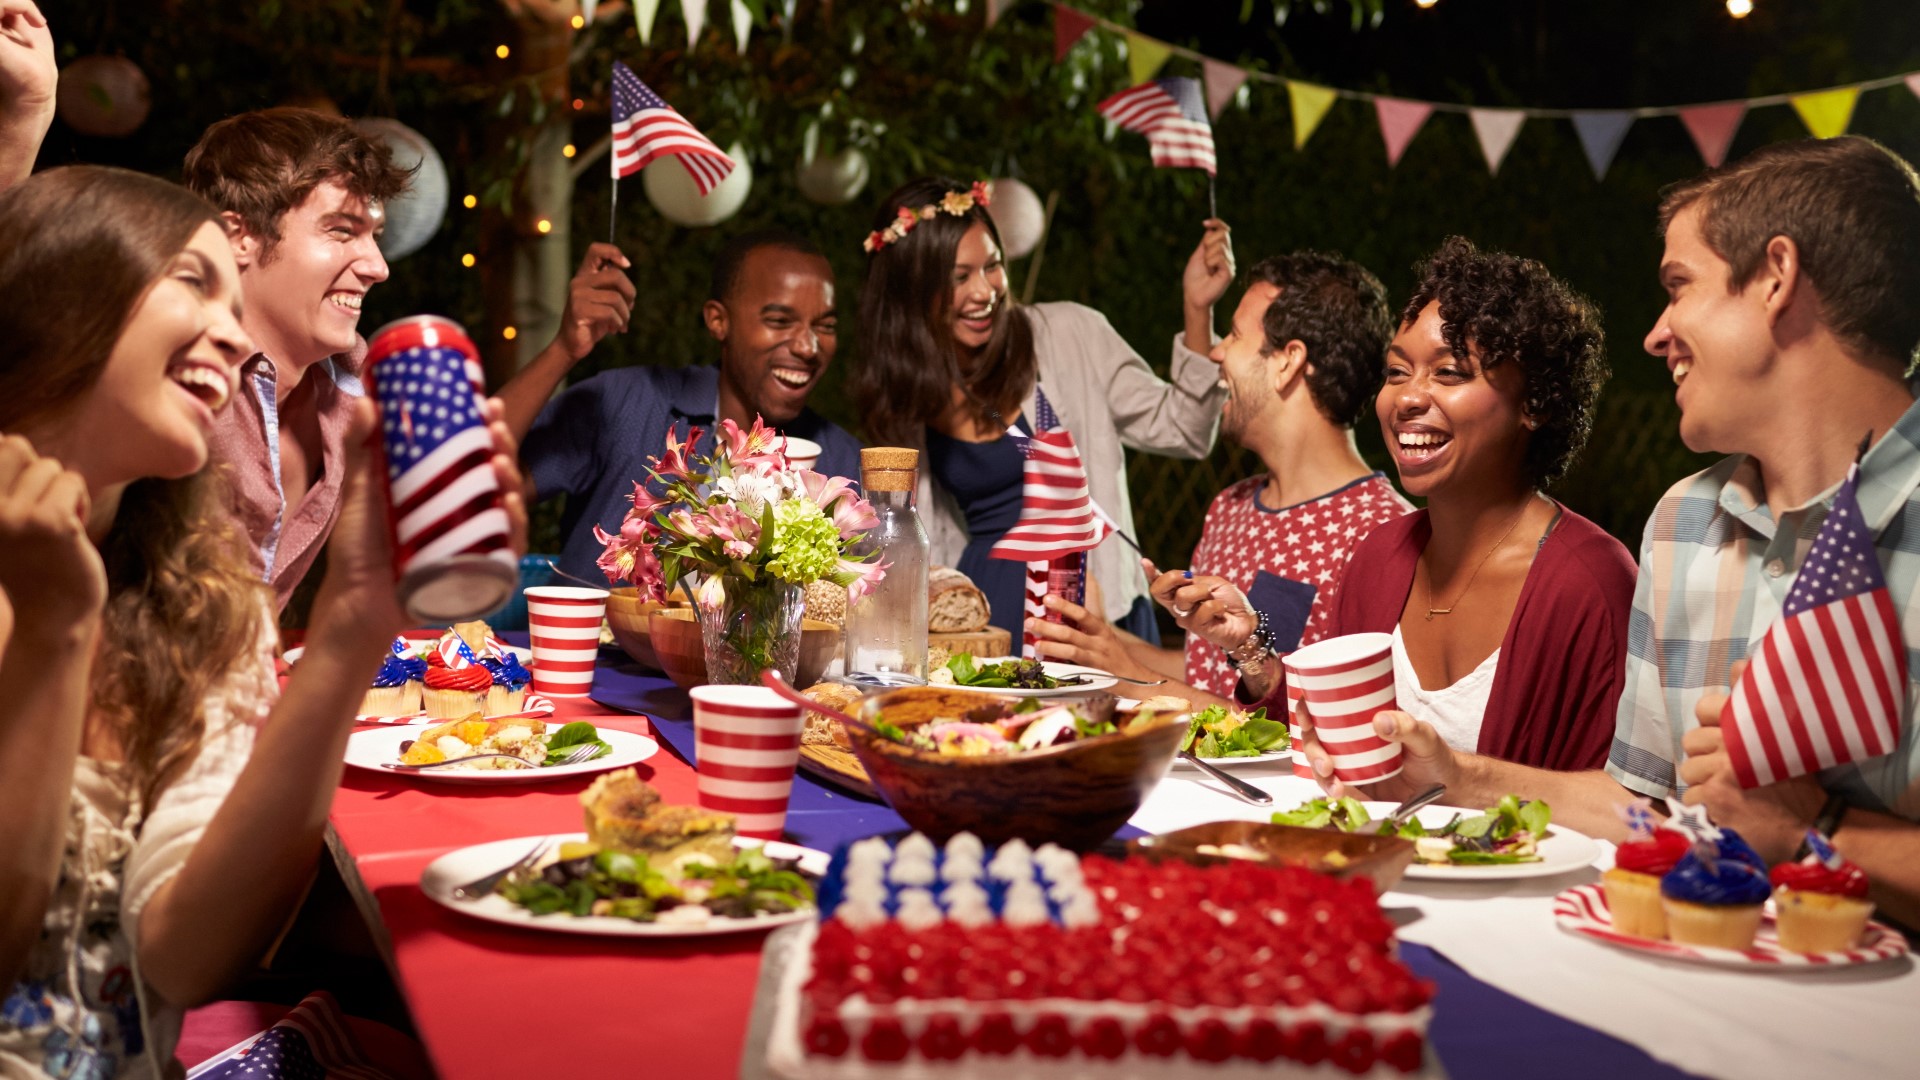 Sponsored by: Dailylounge.com. Celebrity Chef Jamie Gwen shares tips on how to make your July 4th party pop! For more info go to dailylounge.com.